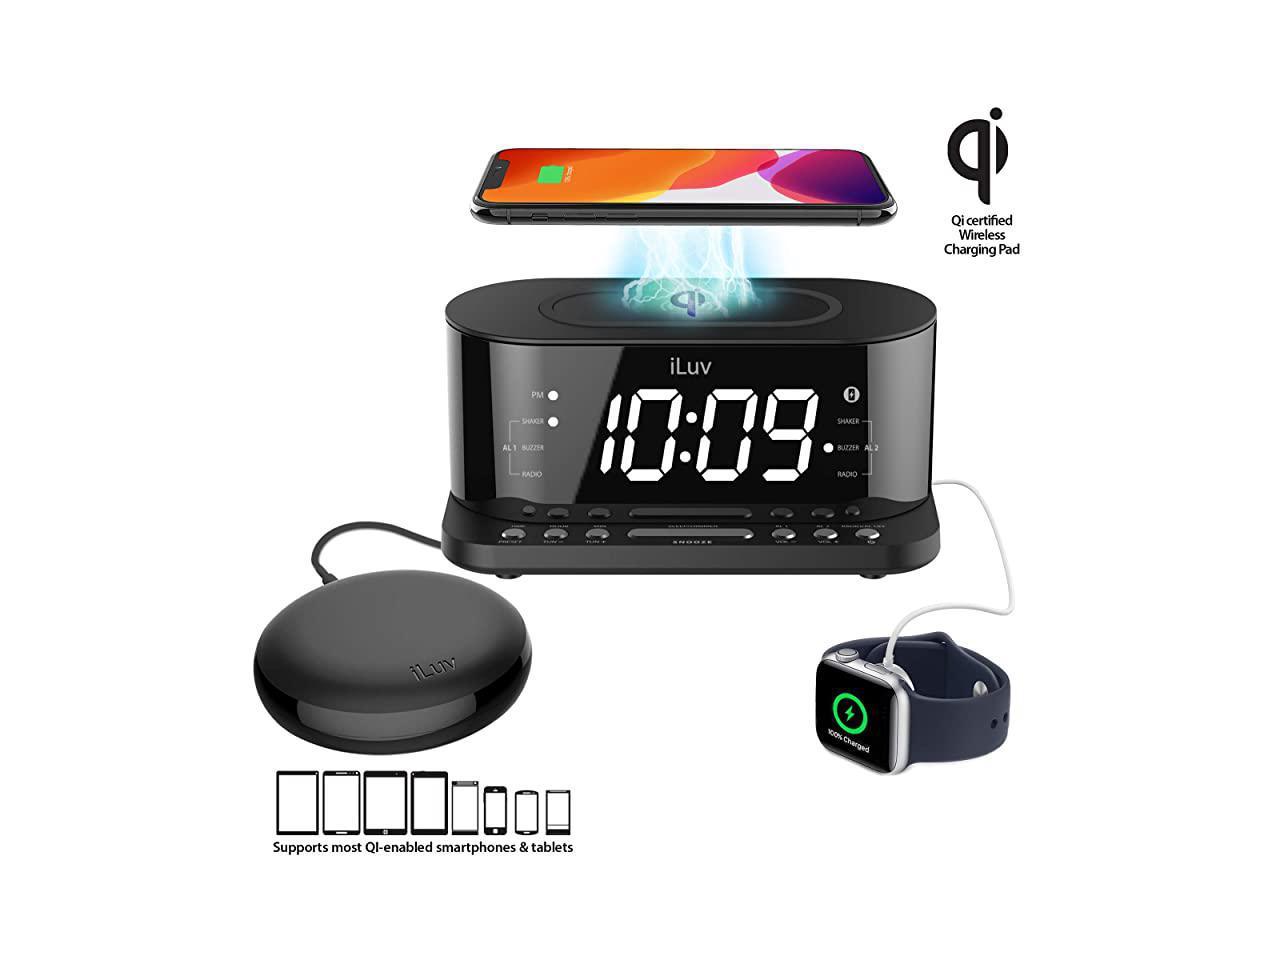 FM Radio Battery Backup Dual Alarm Jumbo LCD White Display iLuv Time Shaker 5Q Wow Qi-Certified Wireless Charging Alarm Clock with Vibration Shaker USB Charging Port 3-Level Dimmer Sleep Timer